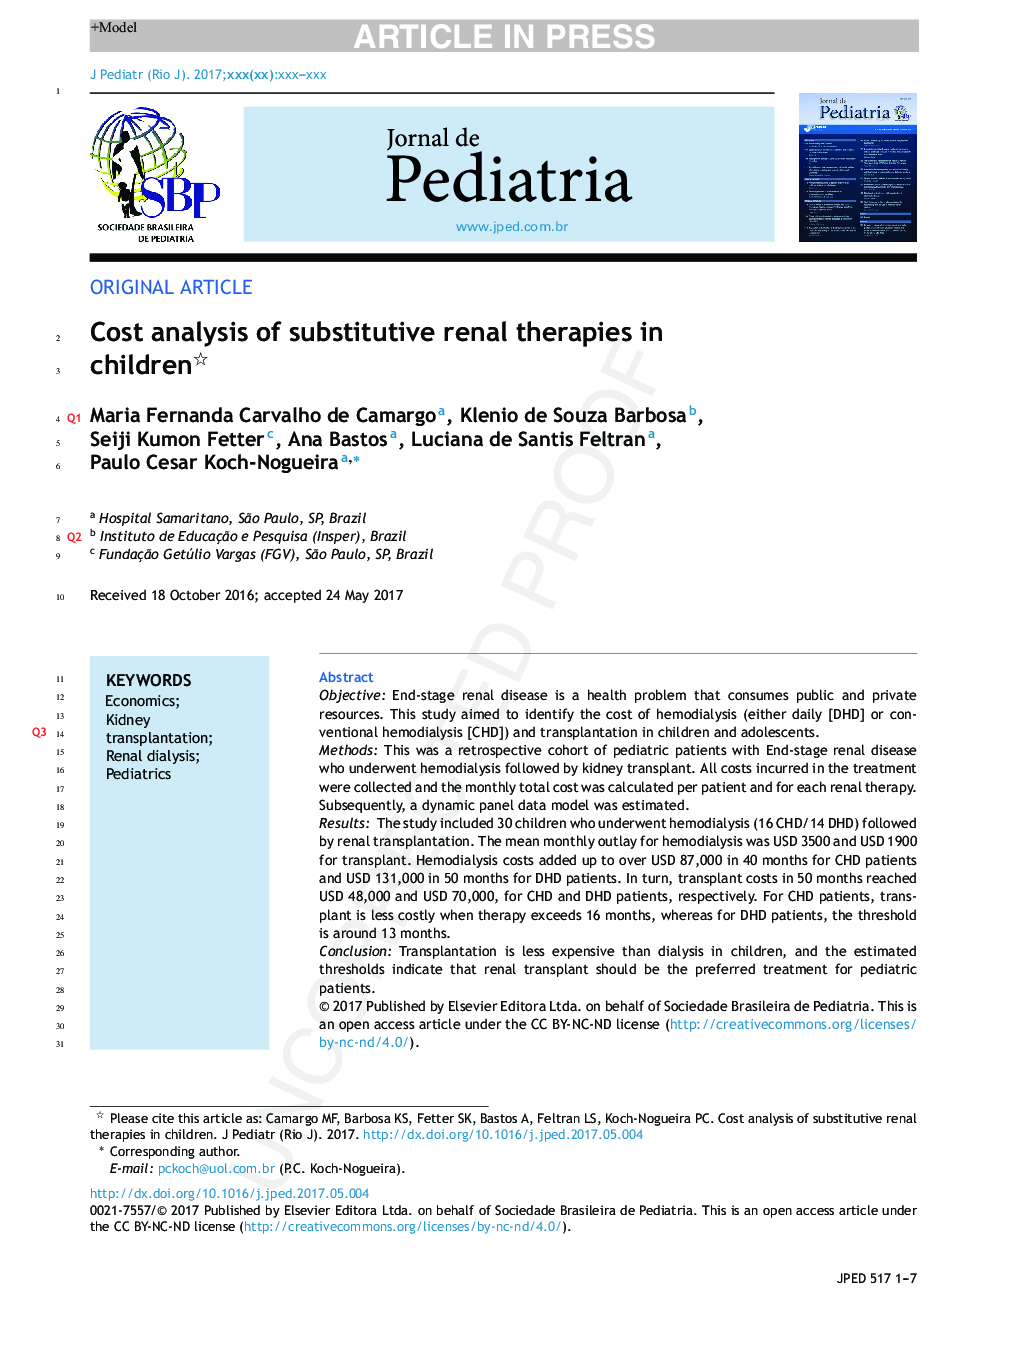 Cost analysis of substitutive renal therapies in children